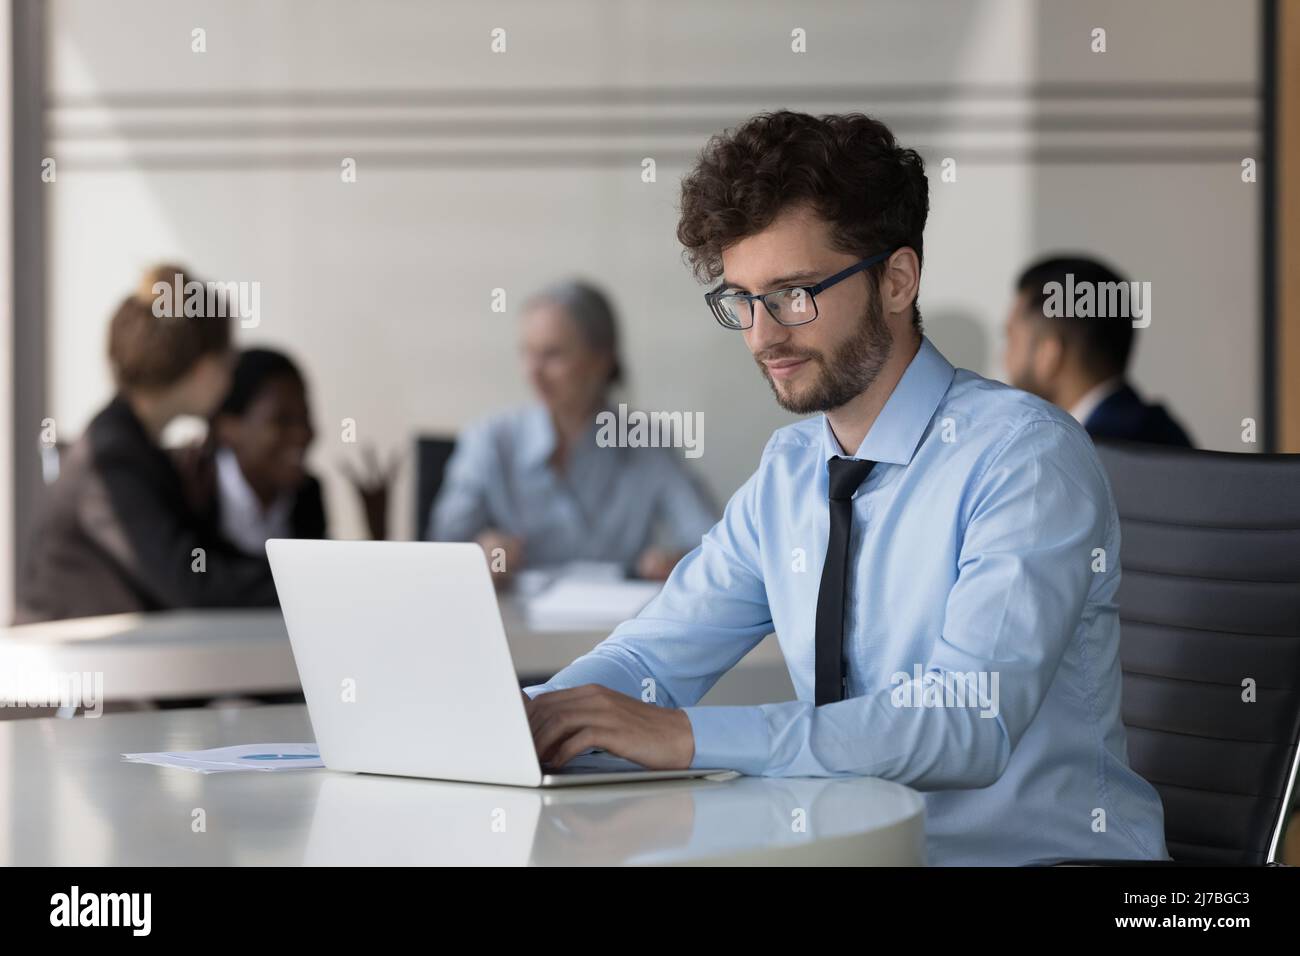 Serious young startup leader guy working on project Stock Photo